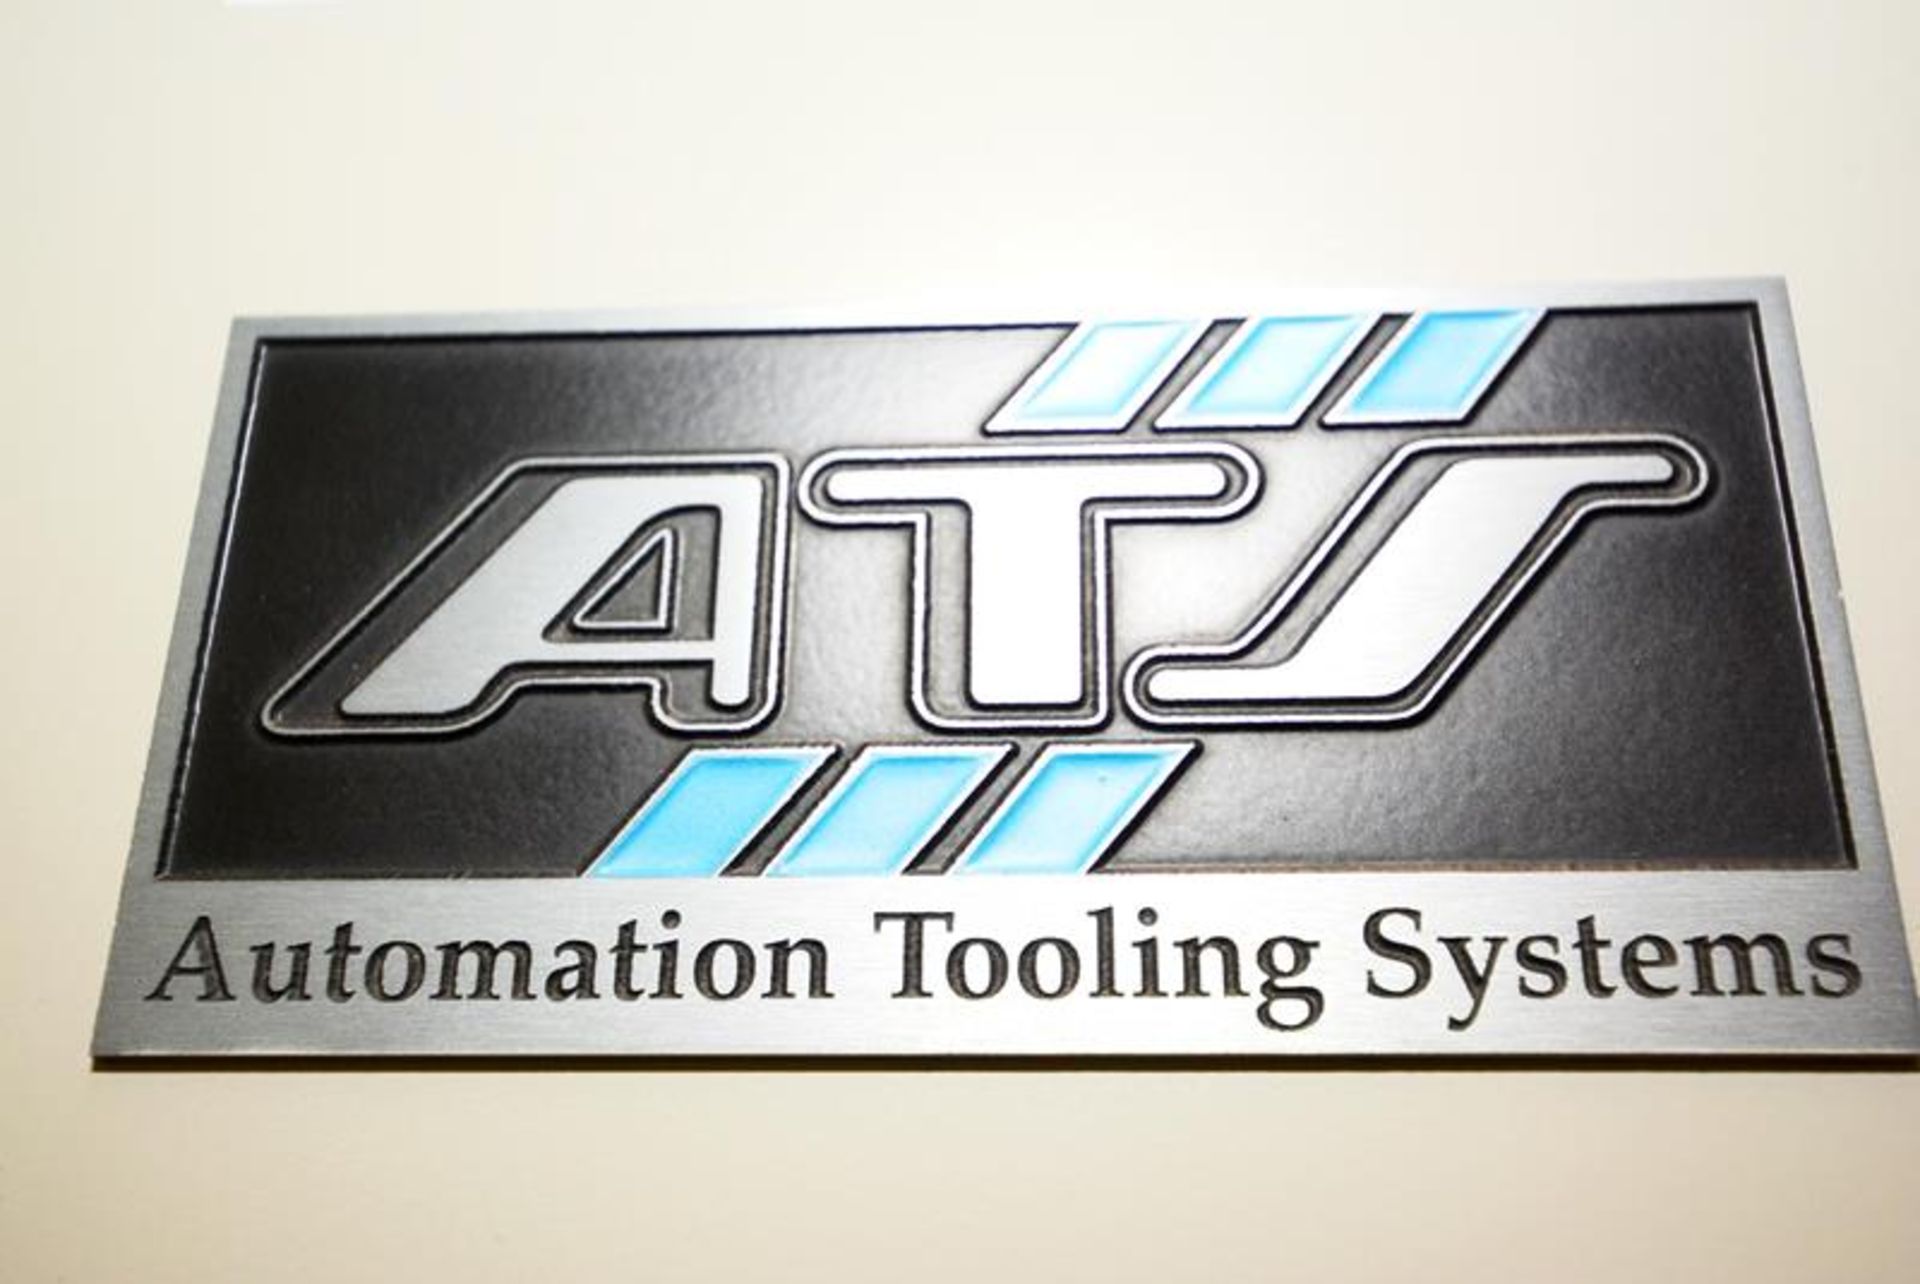 Equipment: Station 050, Assembly of components. Brand: ATS. Model: N/A. Year: N/A. Serial Number: - Image 12 of 14